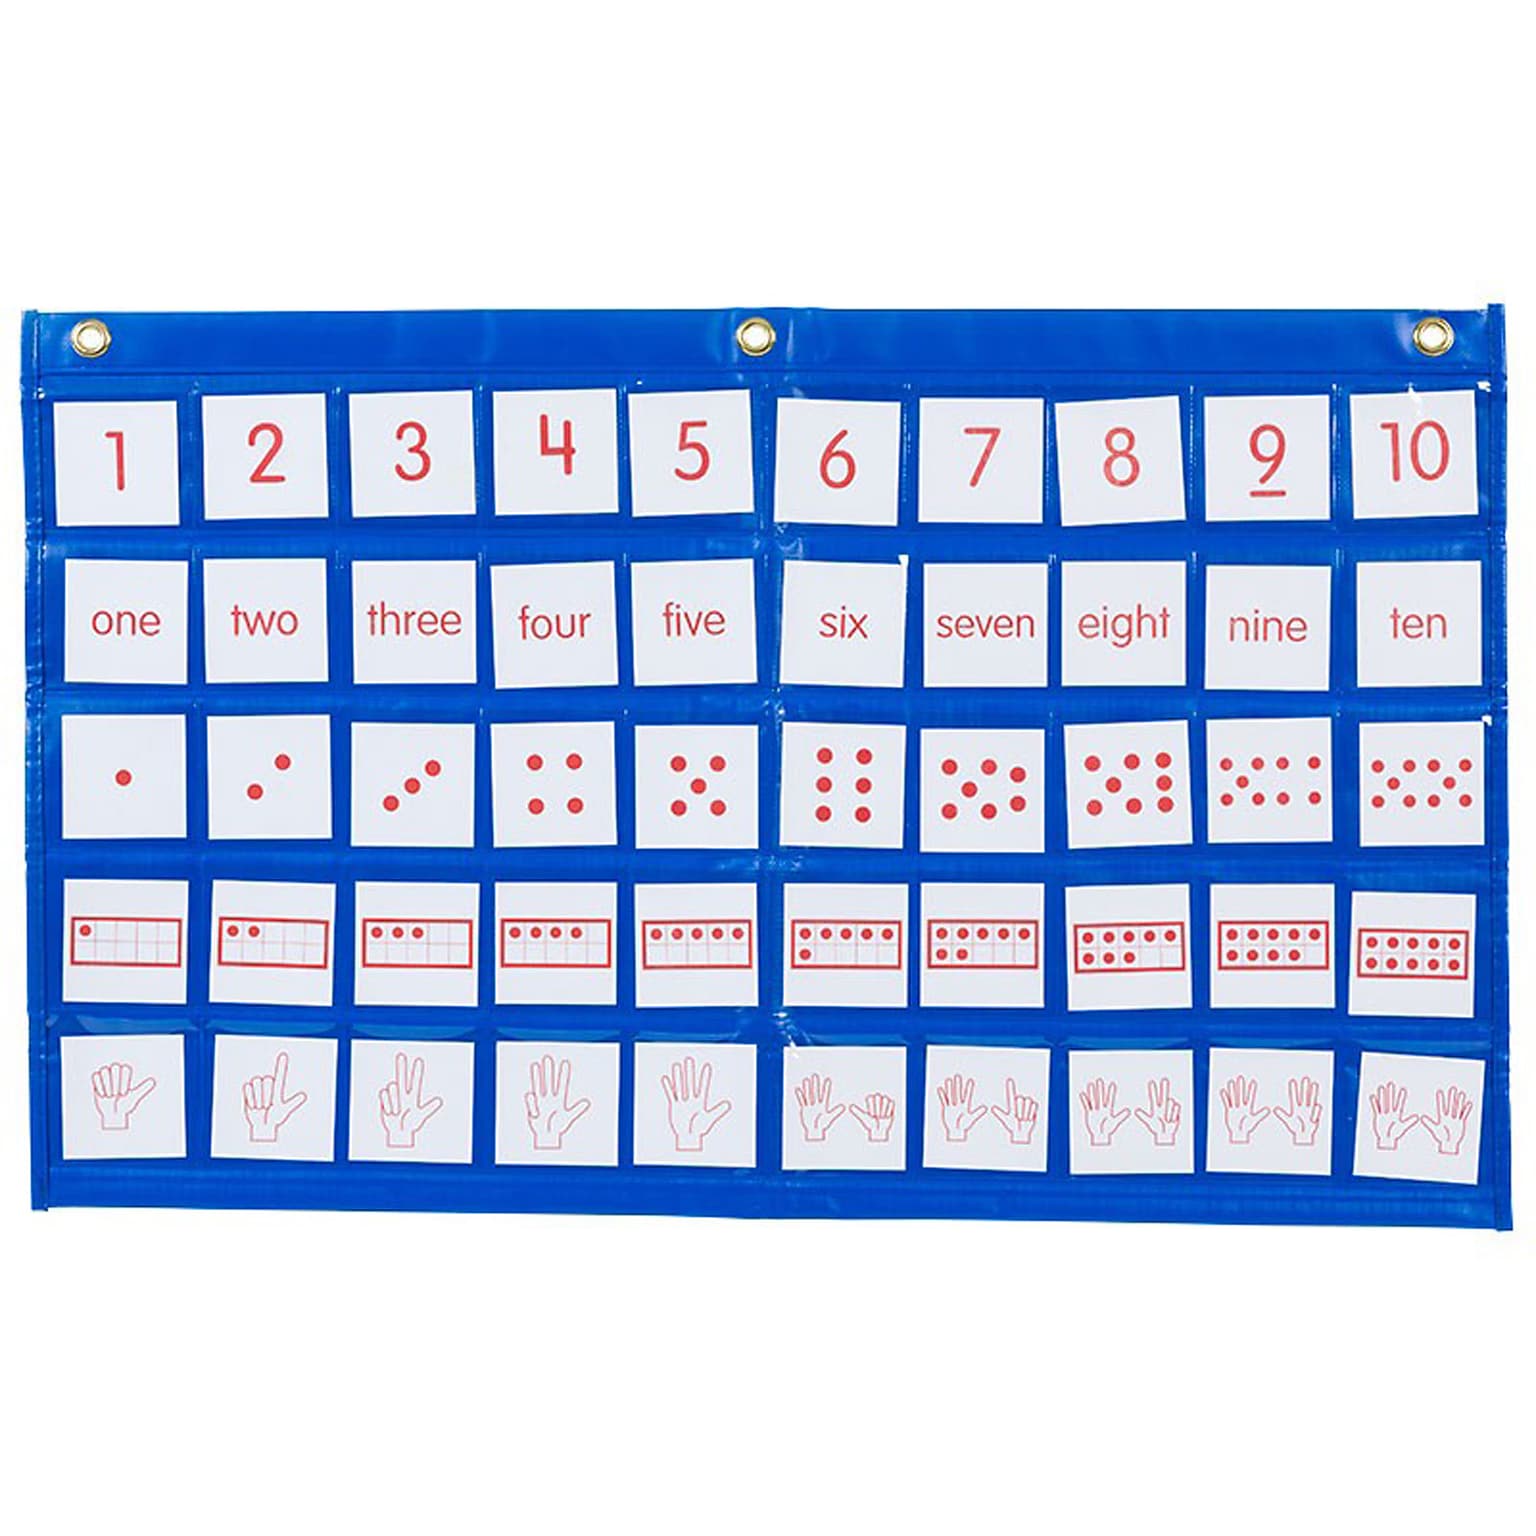 Didax Number Path Pocket Chart With Cards Grades K-2 DD-211773